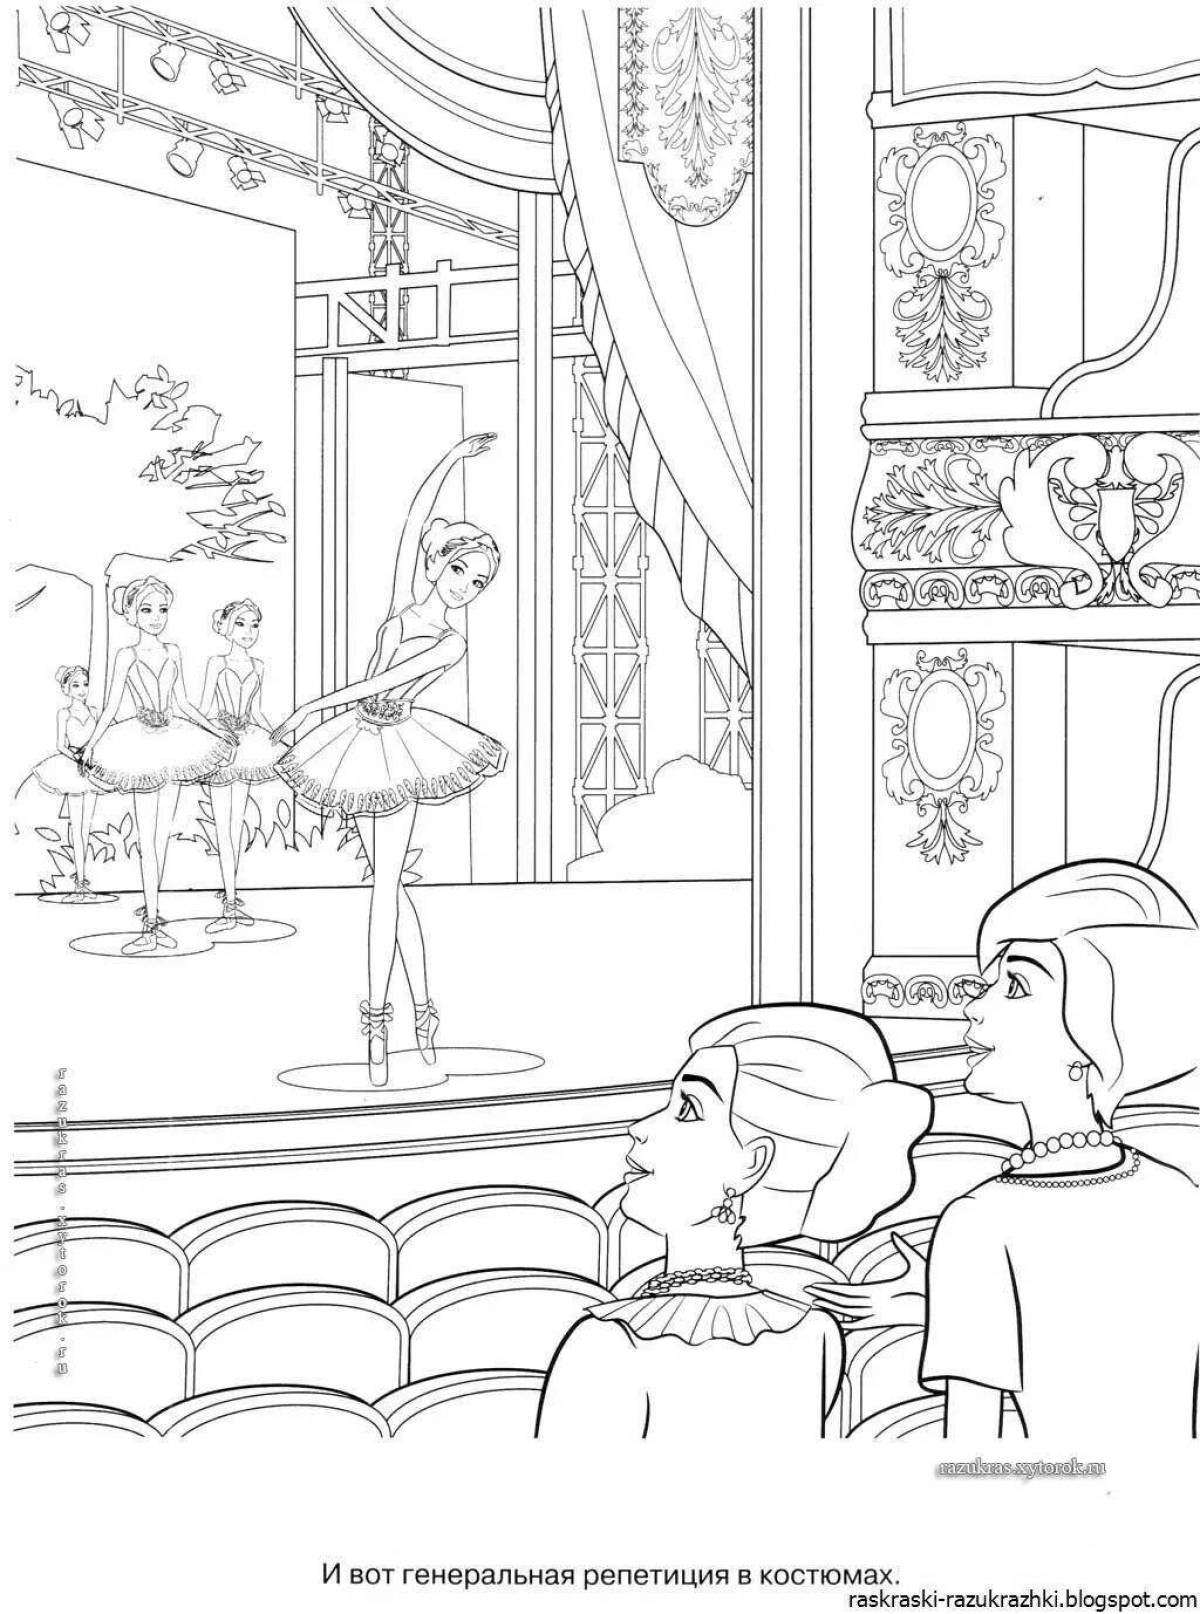 Amazing theater scene coloring book for kids